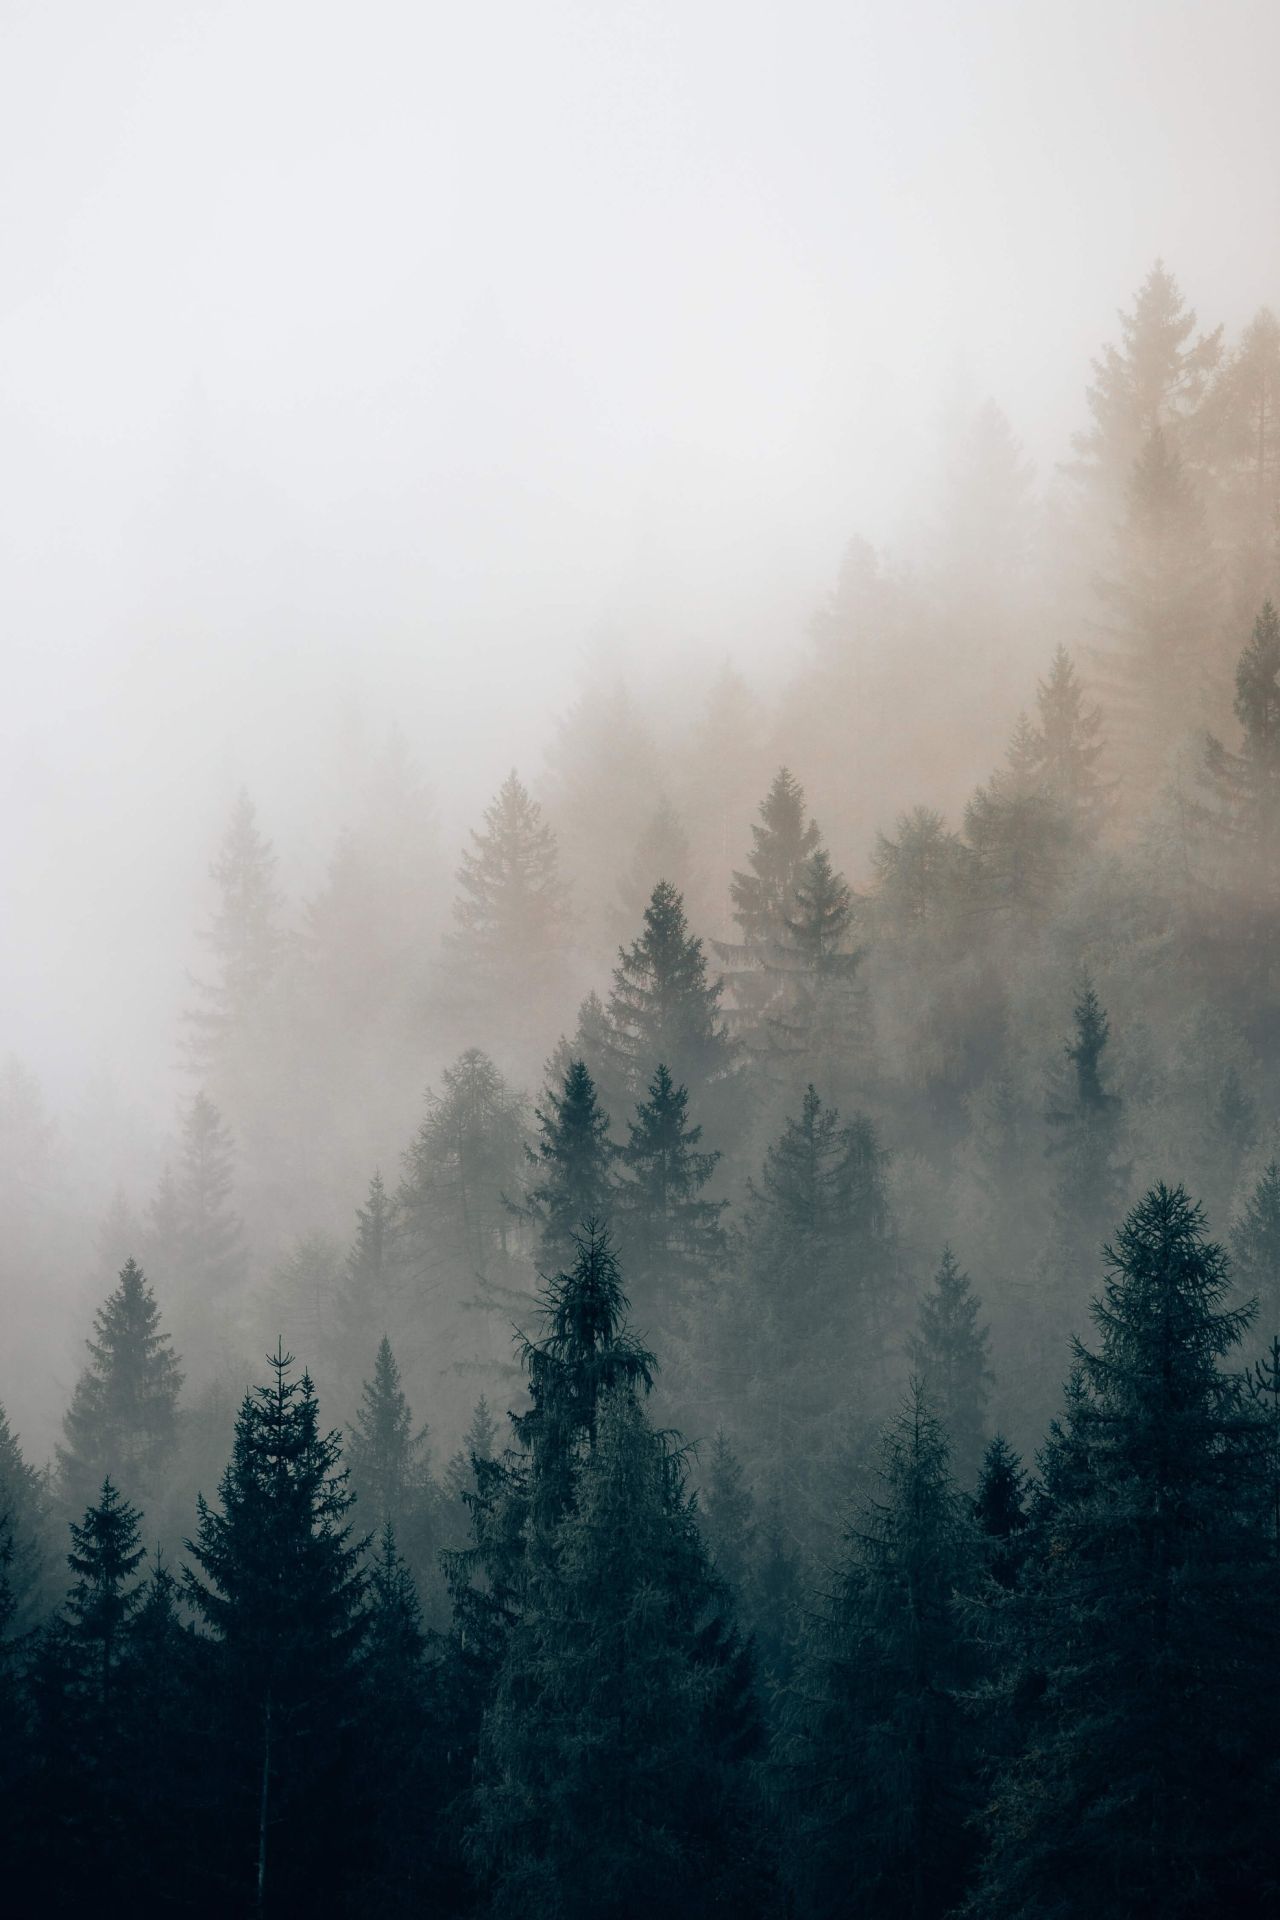 A foggy forest with pine trees and an airplane - Foggy forest